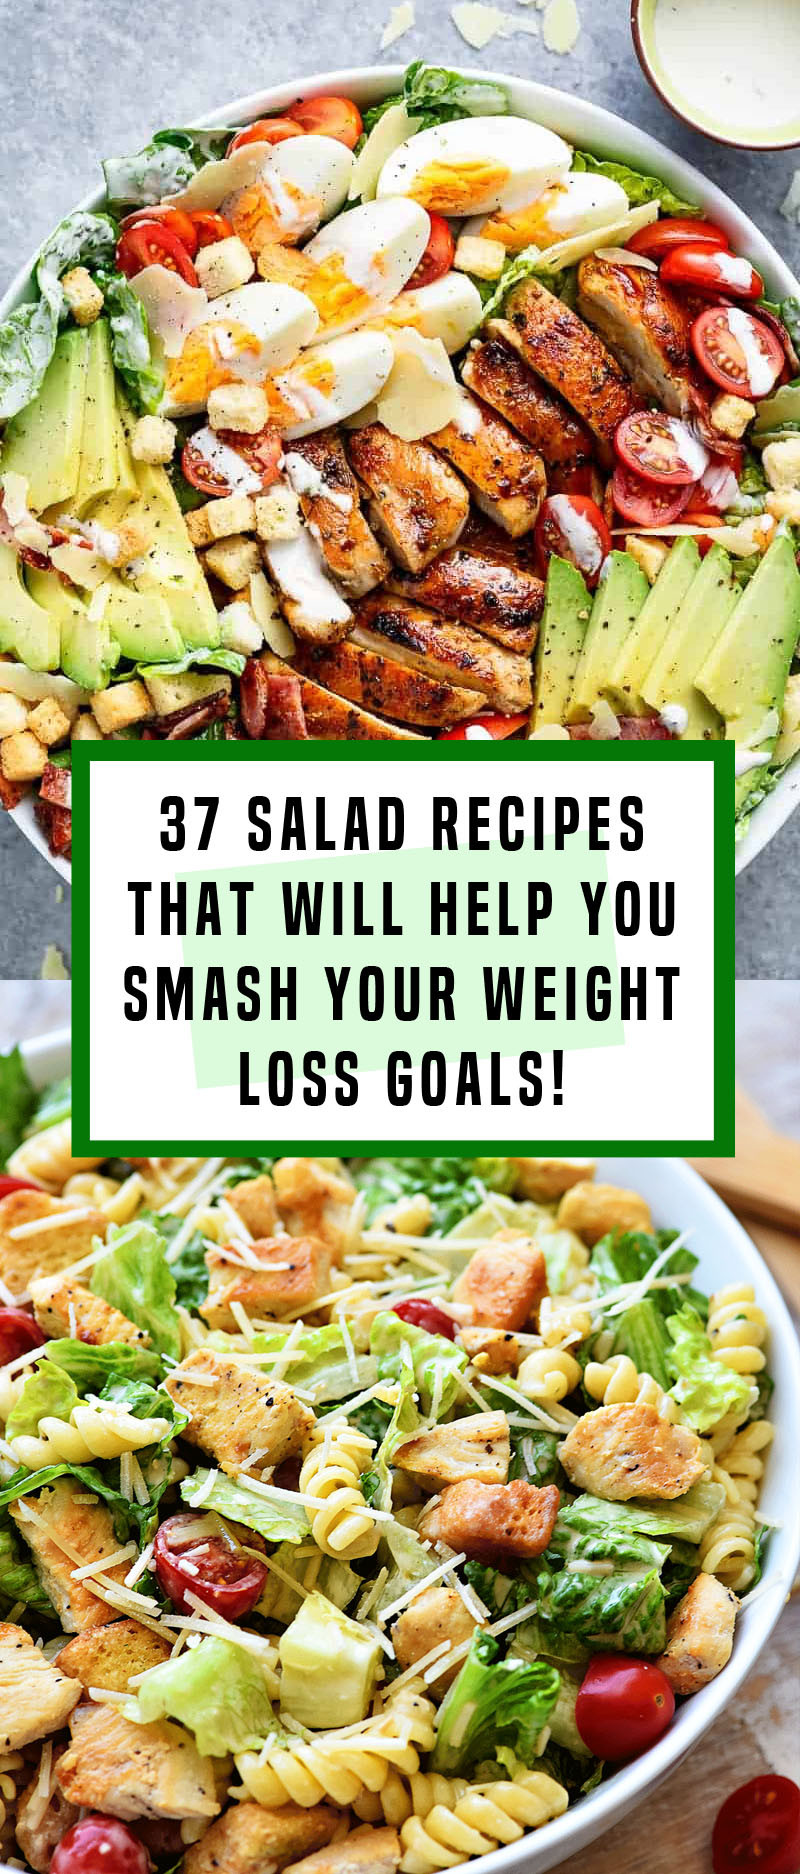 Weight Loss Recipes
 37 Salad Recipes That Will Help You Smash Your Weight Loss